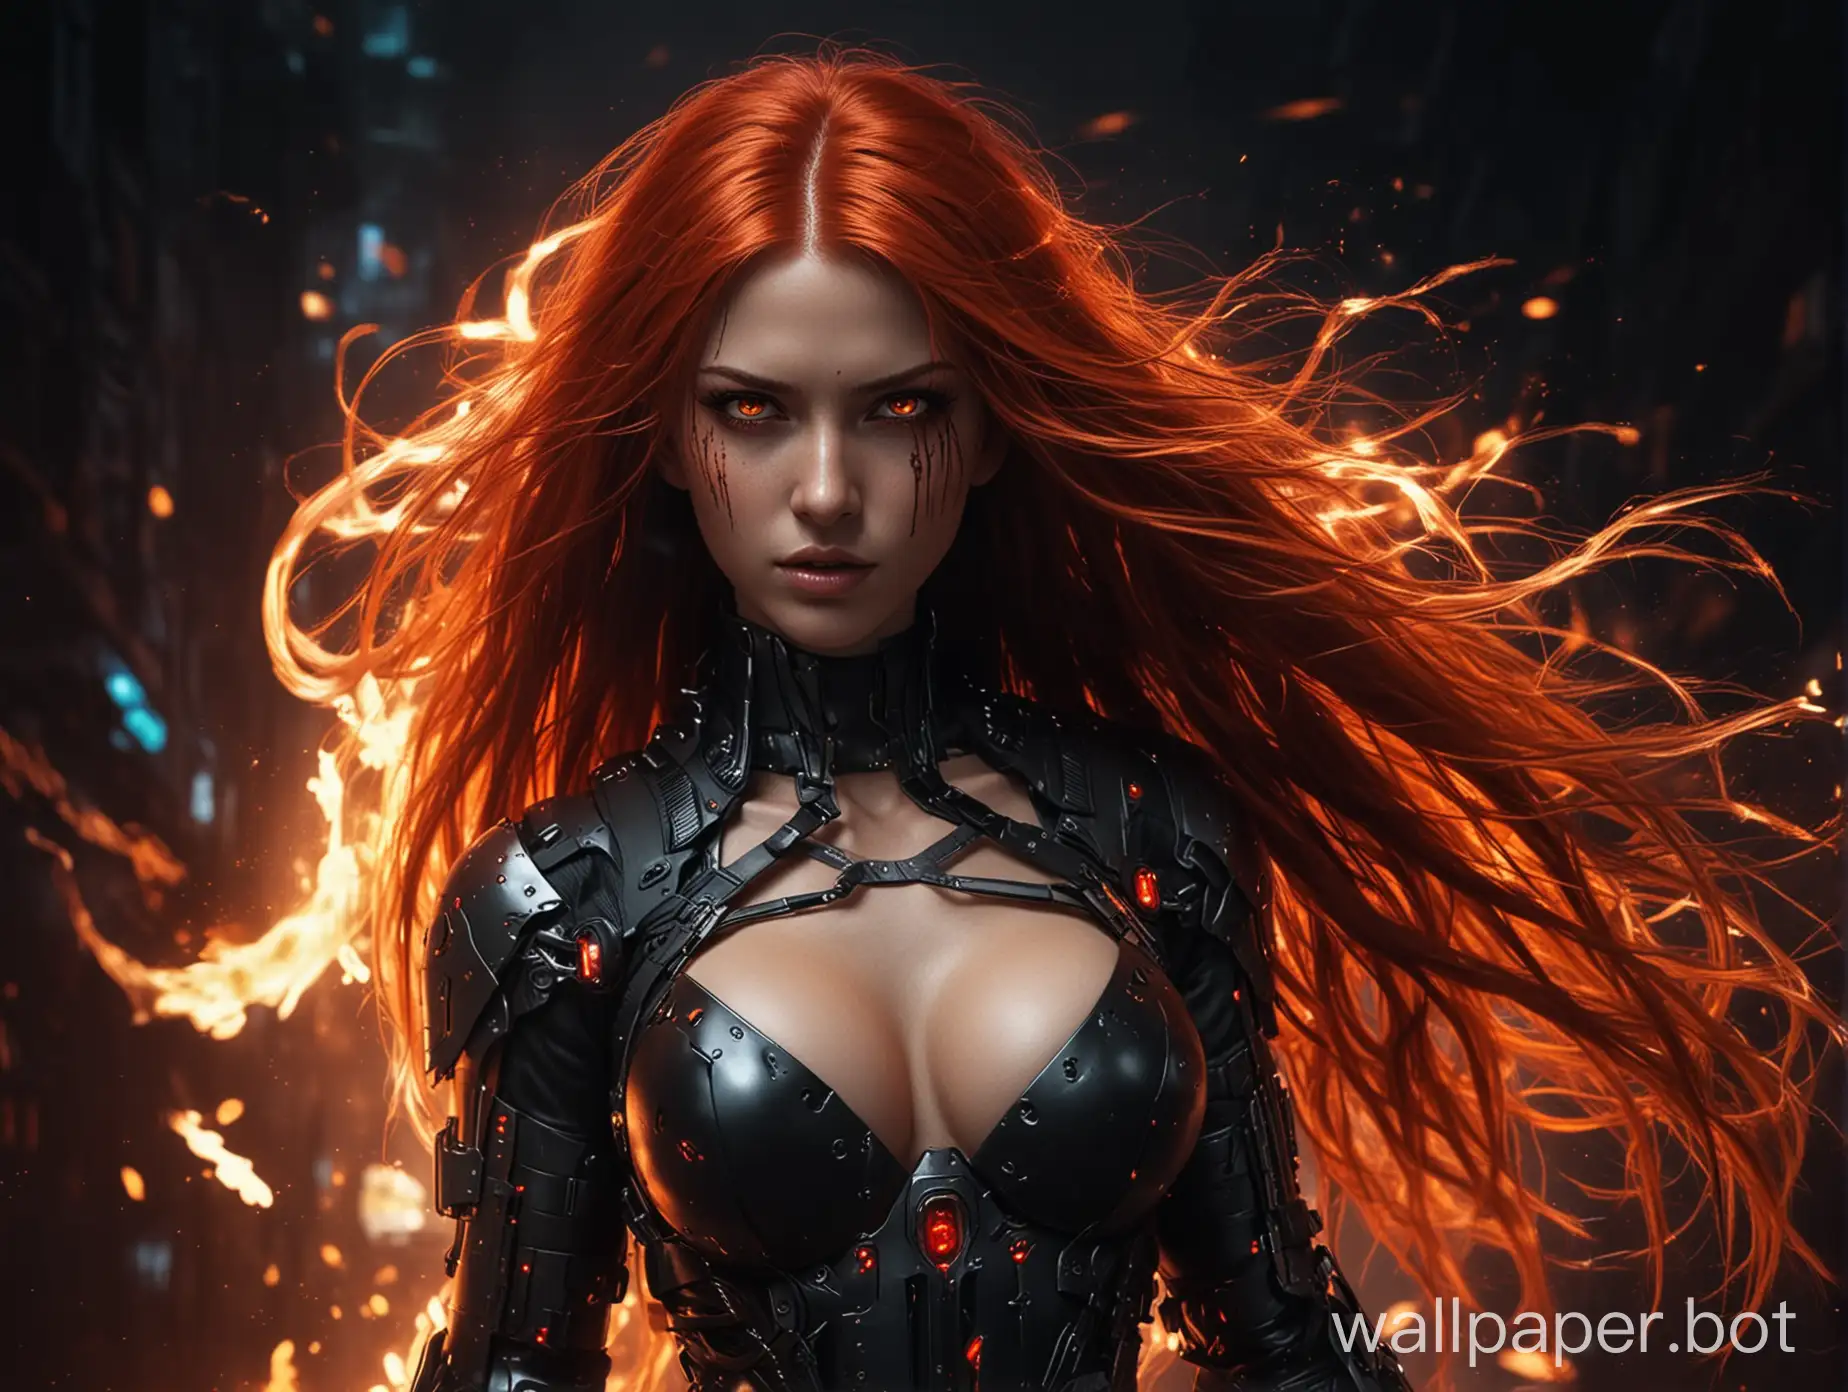 sexual cyber girl, long red hair flowing in the wind and burning with fire, bright red eyes burning with fire, standing tall against a dark background, in the cyberpunk genre